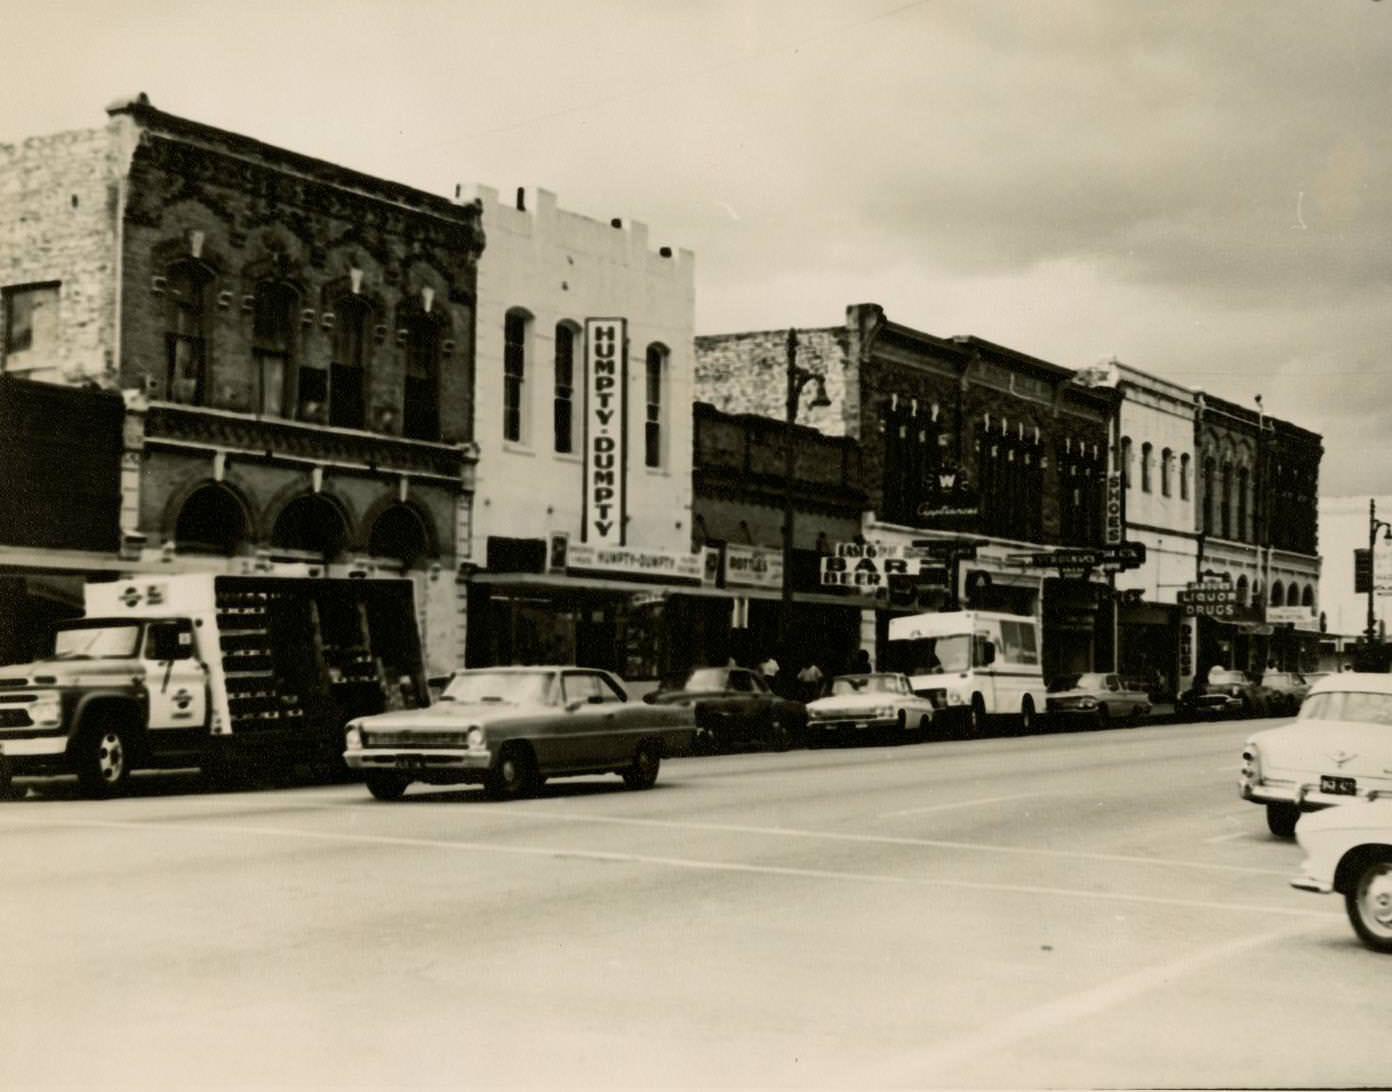 East 6th Street at Neches, 1968. Humpty Dumpty Grocery at 419 East 6th is shown in the photo